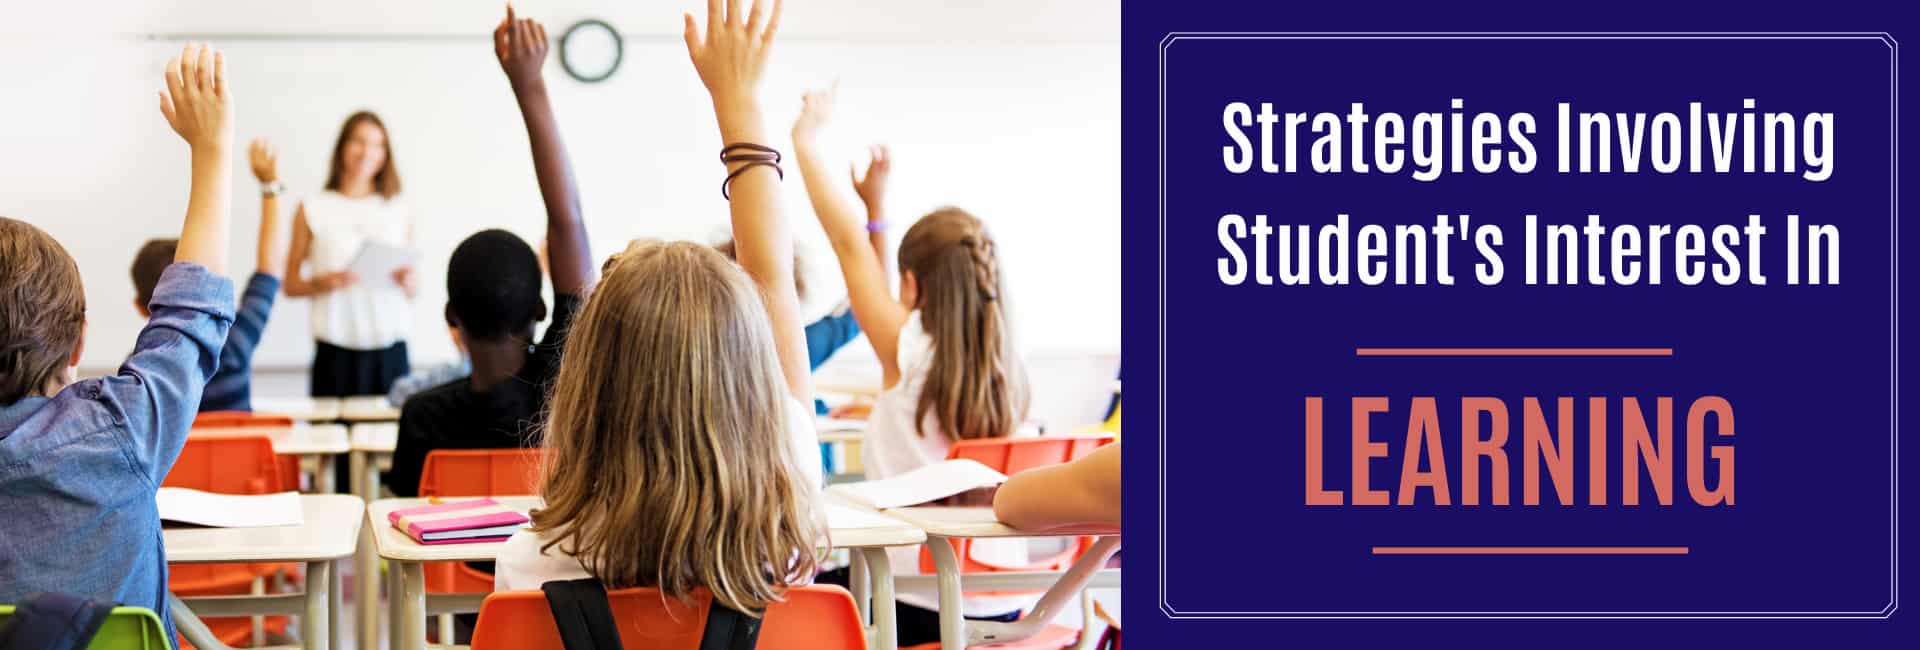 Strategies-Involving-Students-Interest-In-Learning